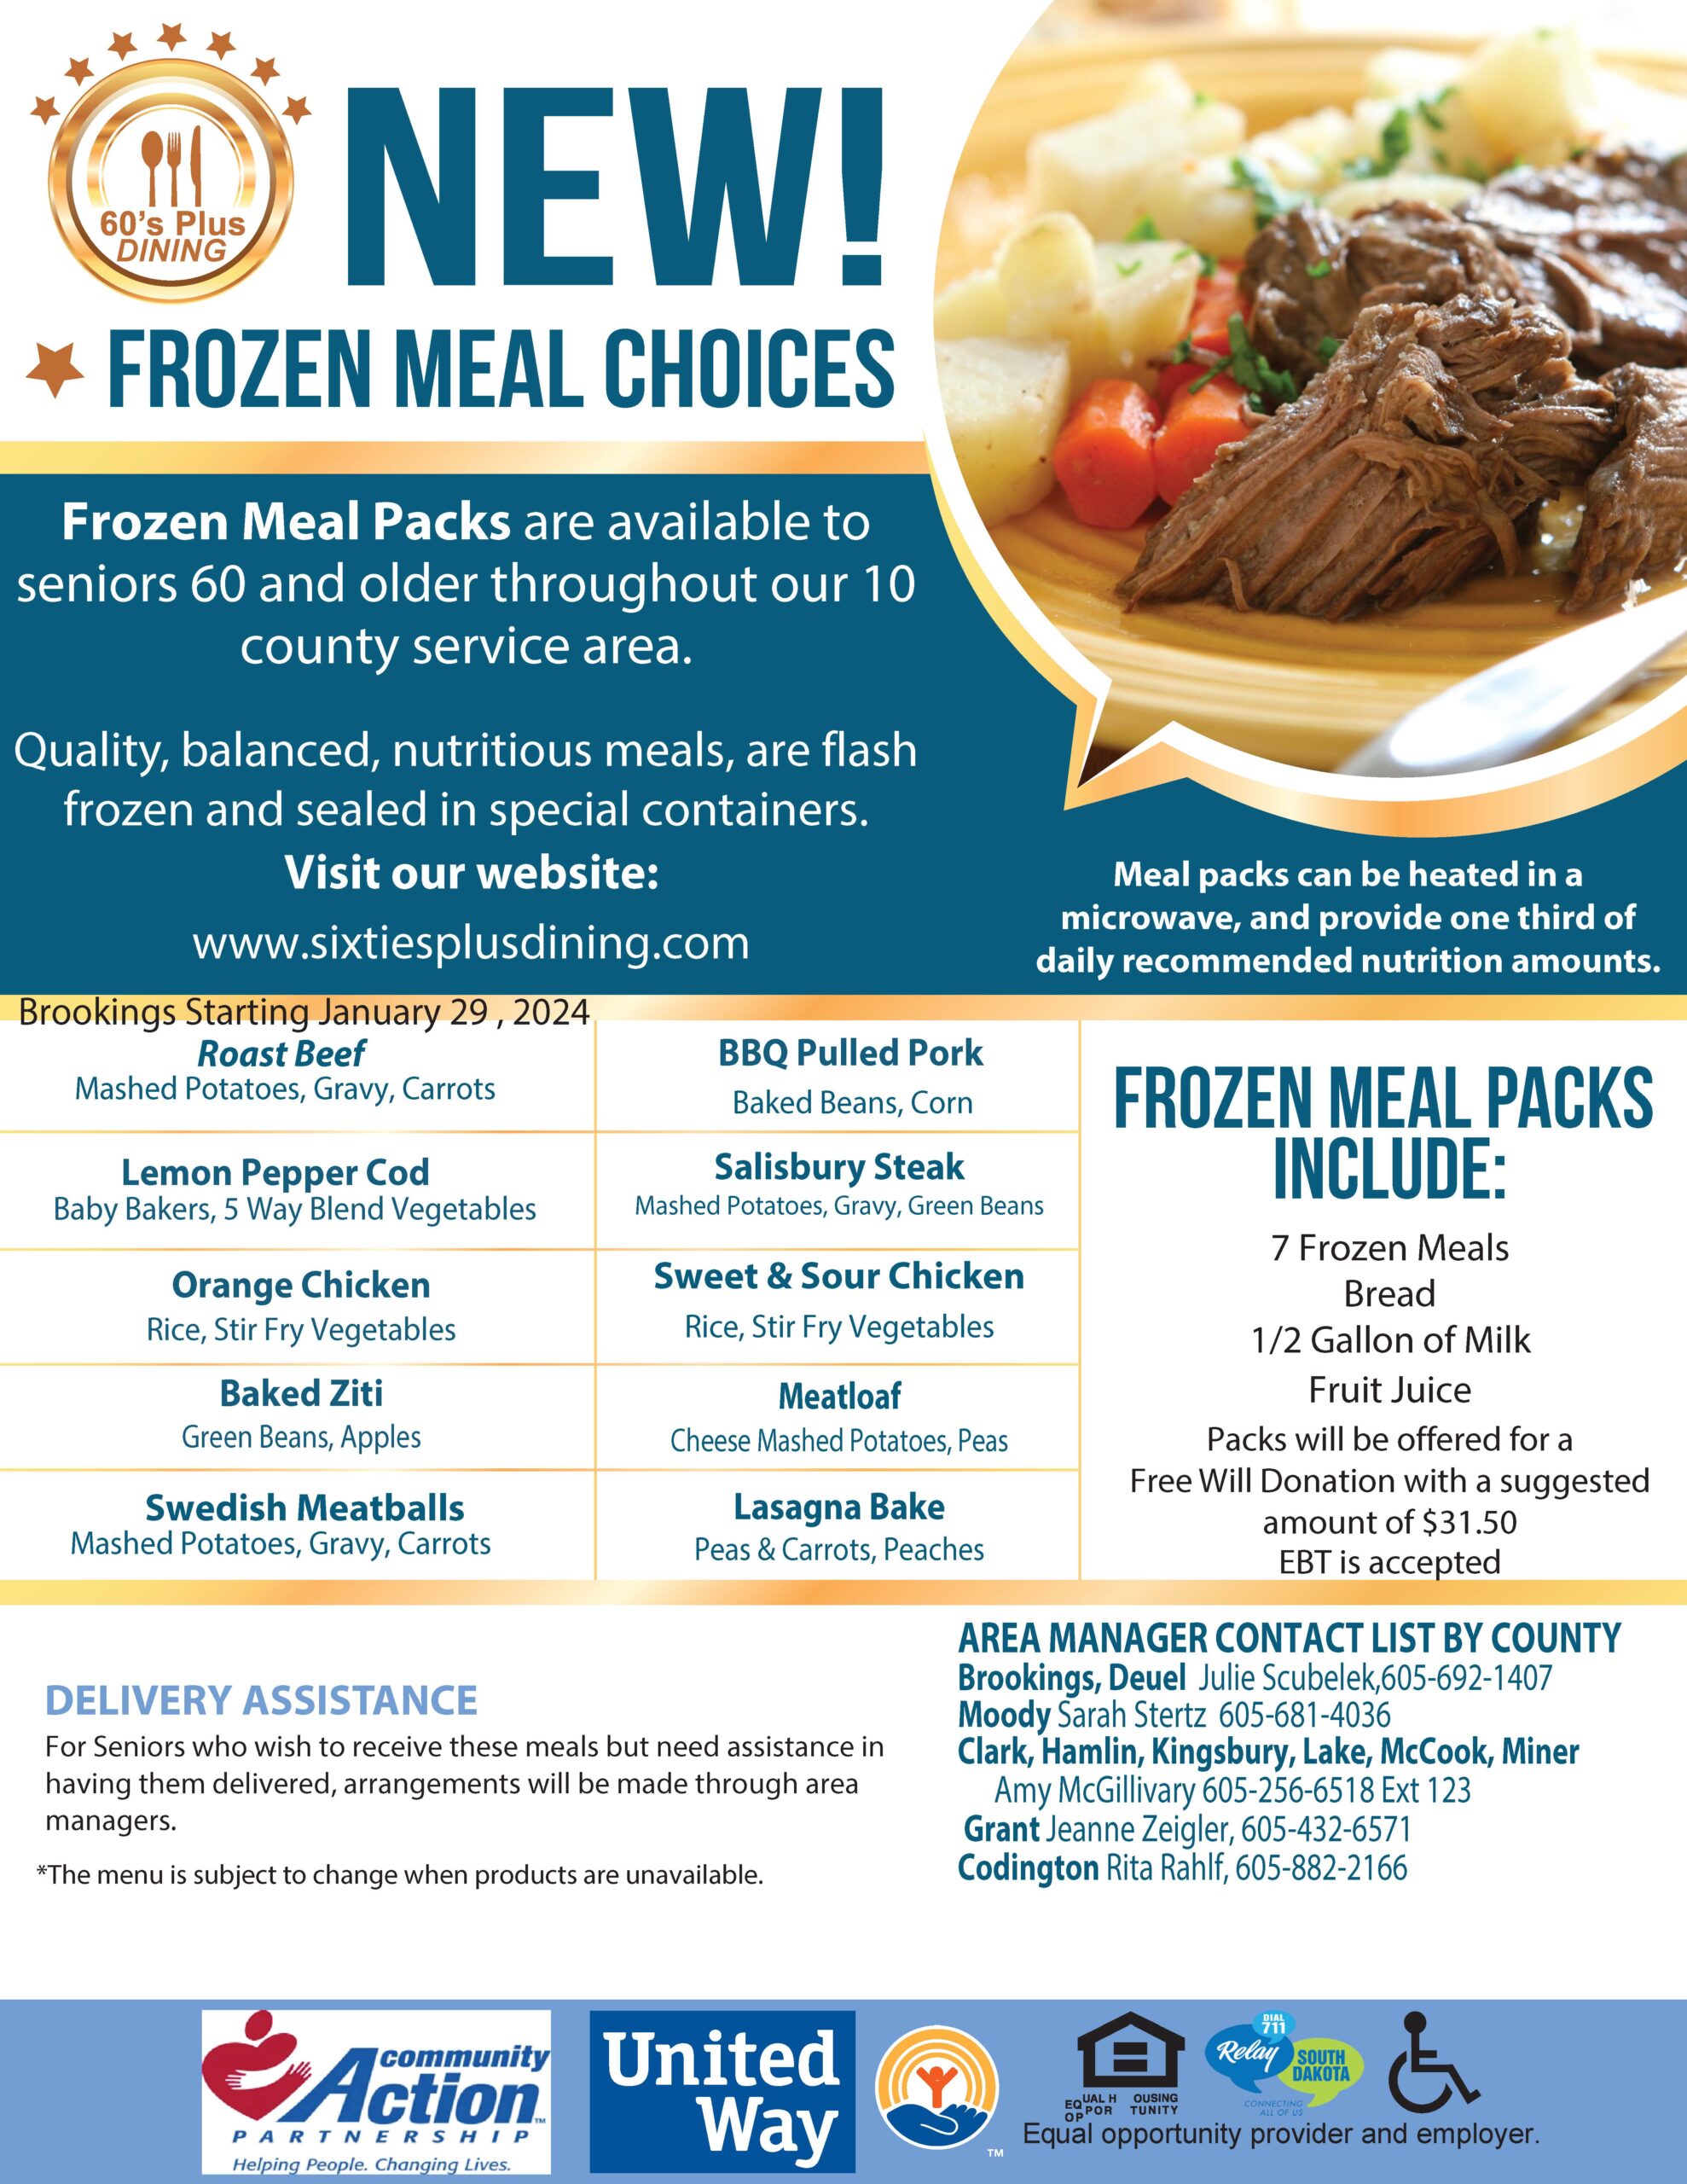 Brookings Frozen Meal Choices - January 2024